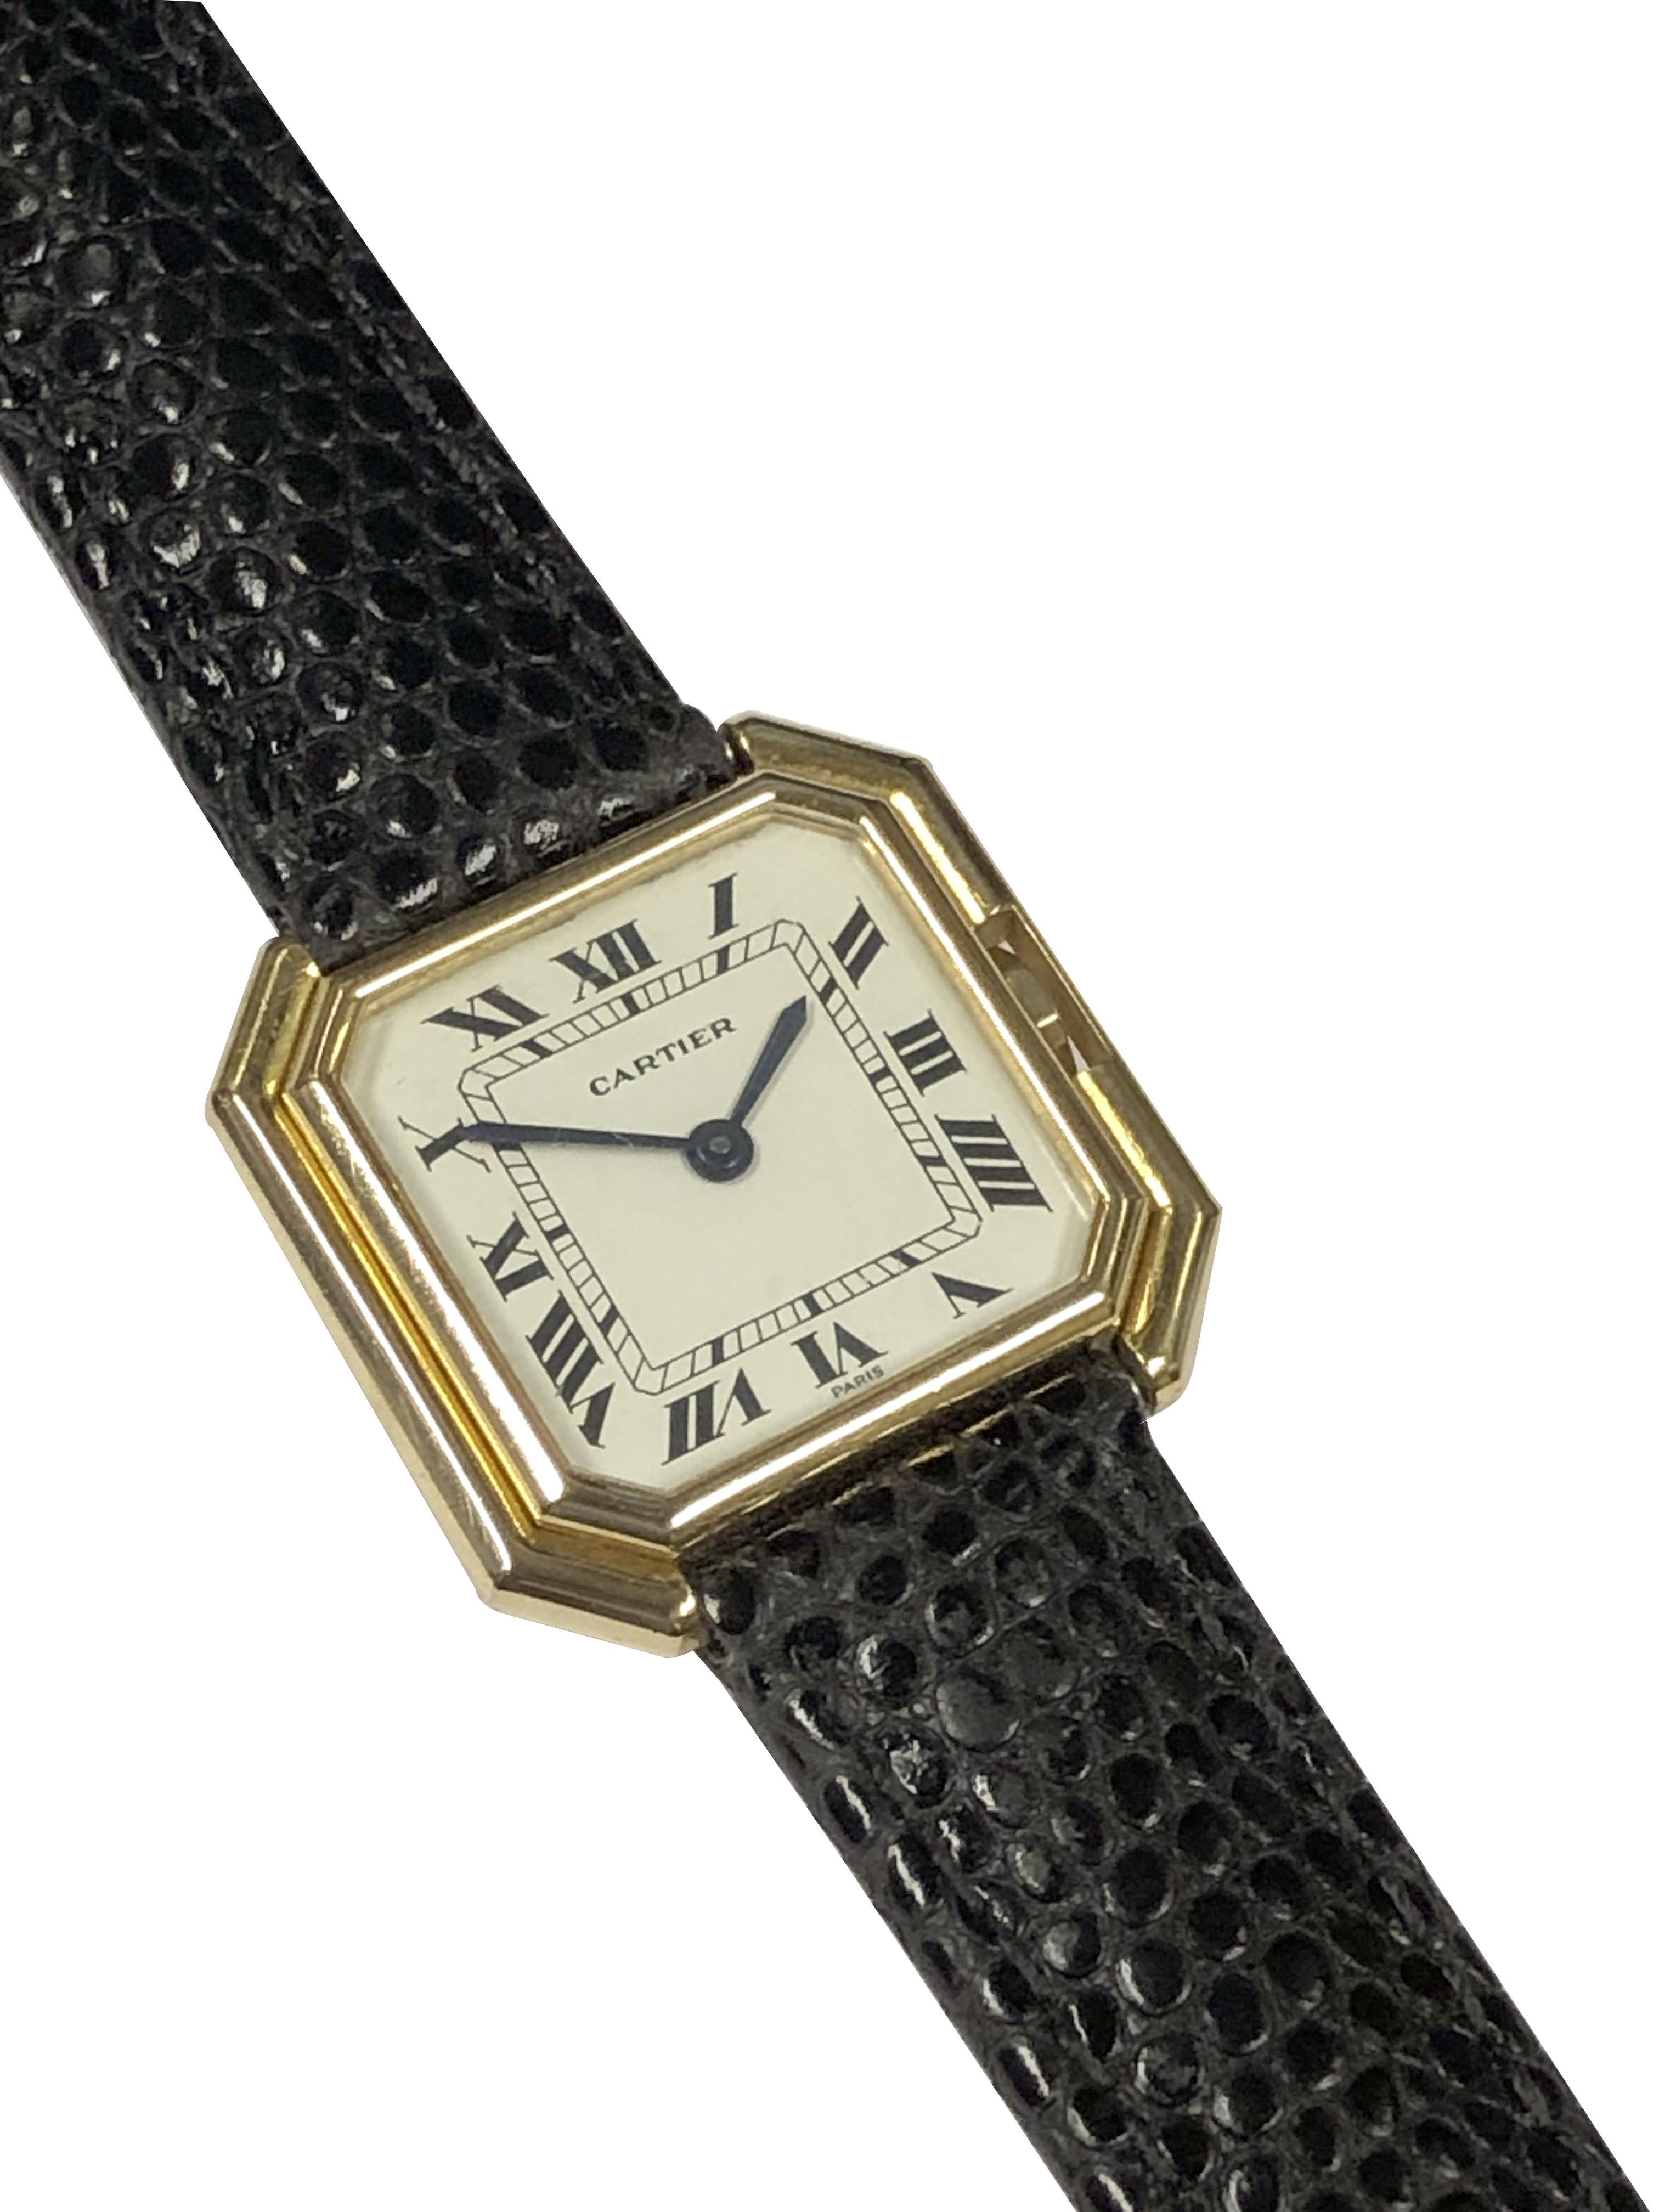 Circa 1980 Cartier Paris Centure Collection Wrist Watch, 18k Yellow Gold 27 X 27 M.M. 2 Piece stepped case. 17 jewel mechanical, manual wind movement. White Dial with Black Roman numerals. New Black Lizard grain strap. watch length 7 3/4 inches.